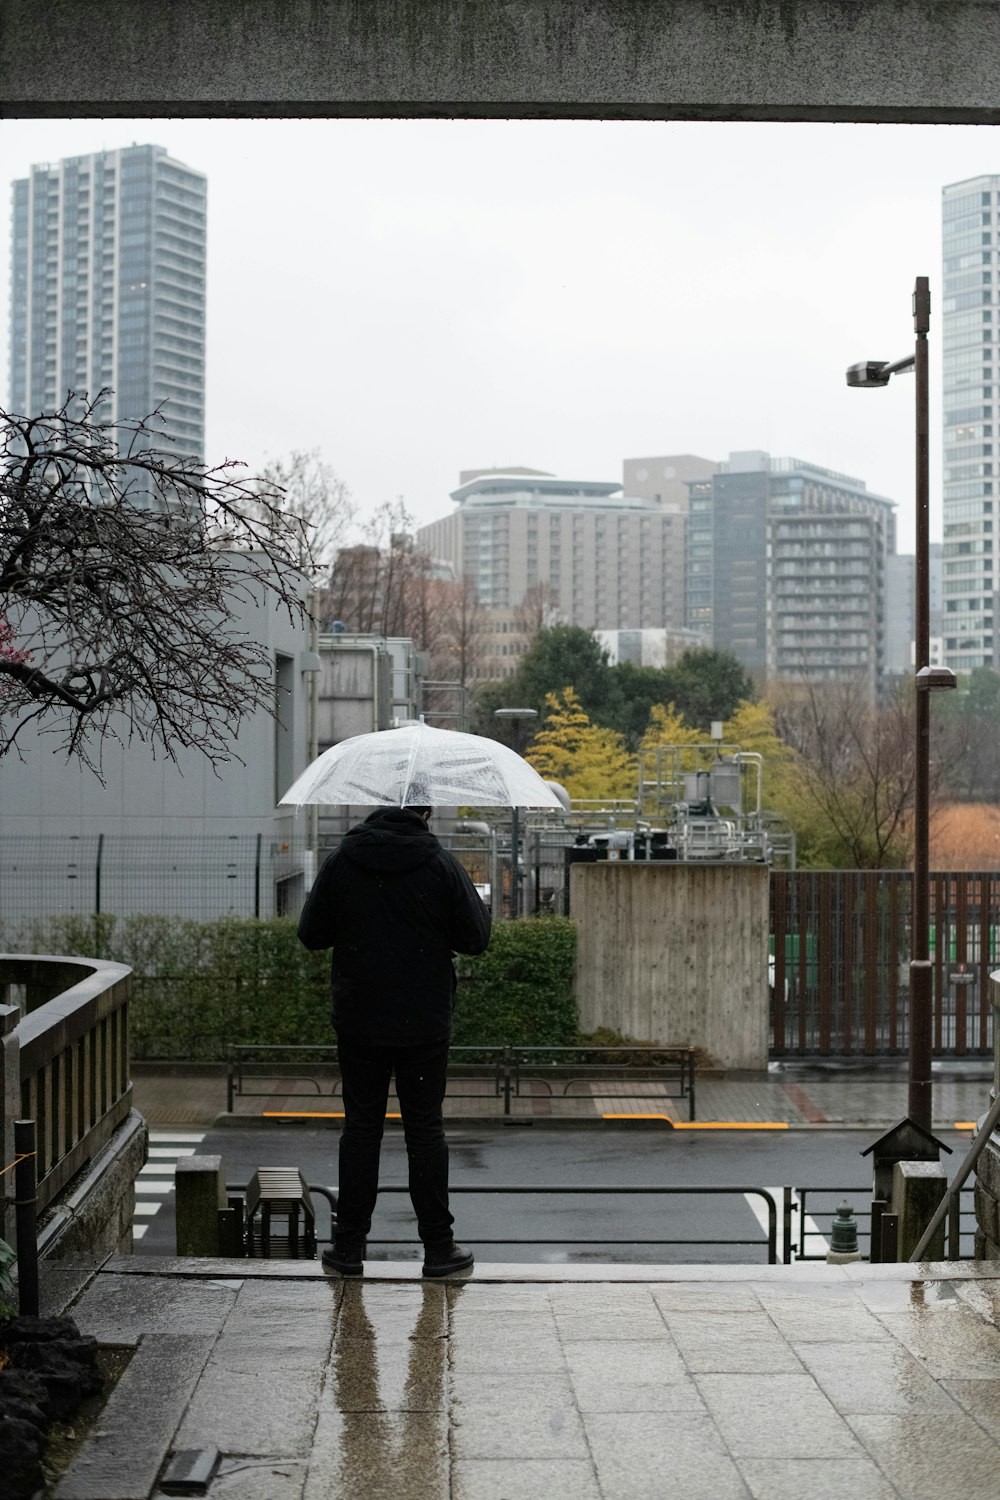 a person standing under an umbrella in the rain